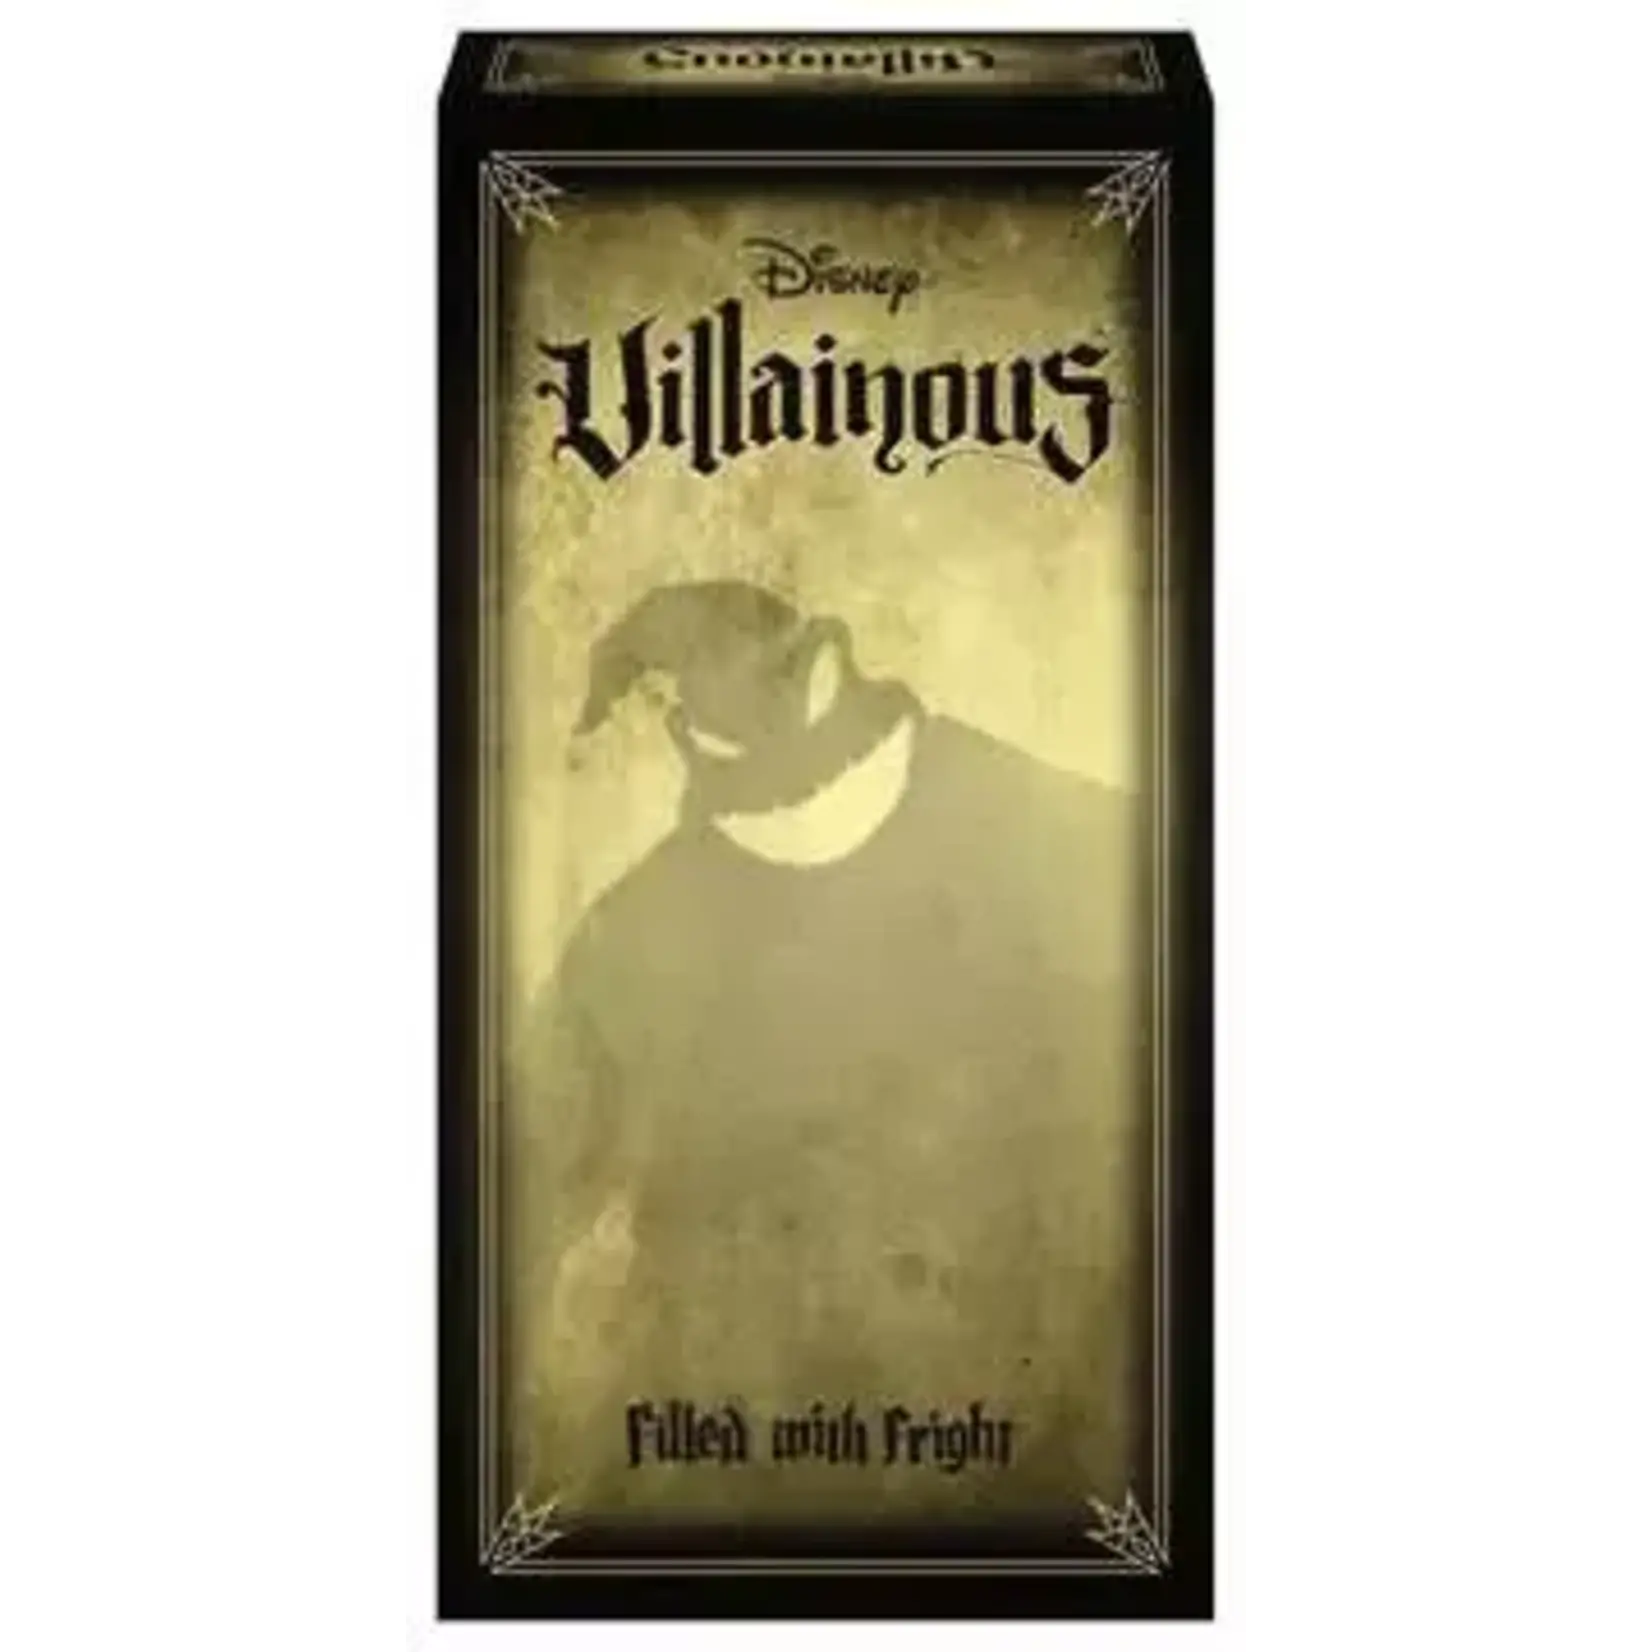 Ravensburger Villainous: Filled With Fright (Expansion)